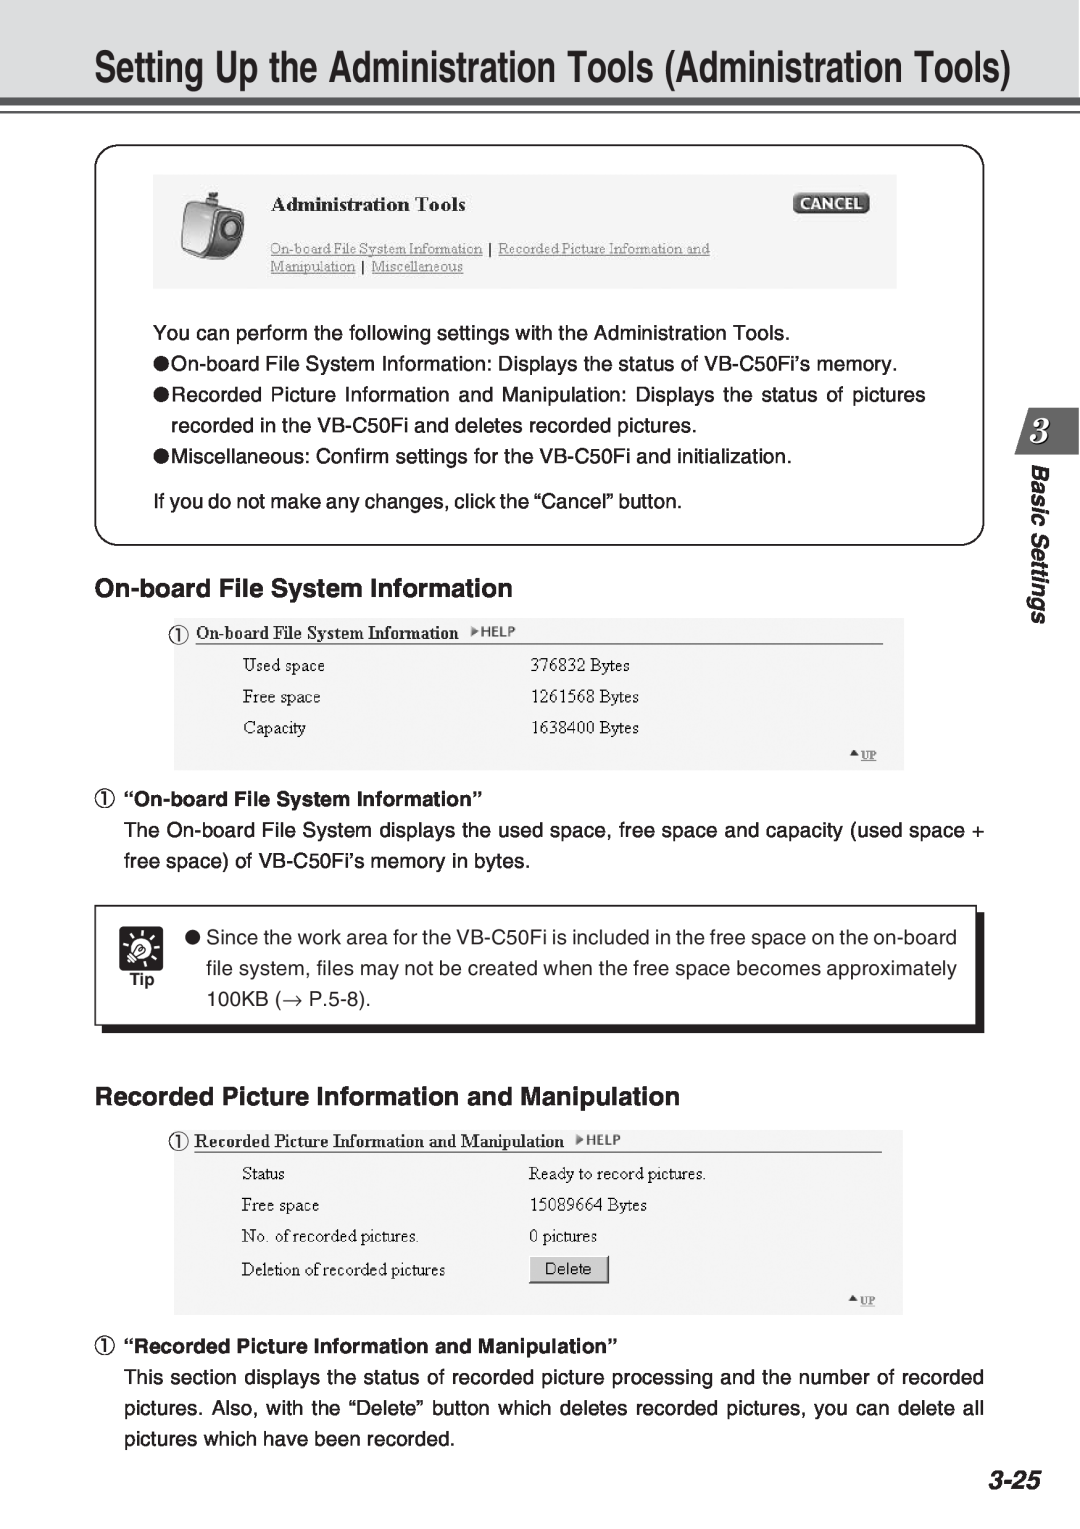 Canon Vb-C50fi On-boardFile System Information, Recorded Picture Information and Manipulation, 3-25, Basic Settings 